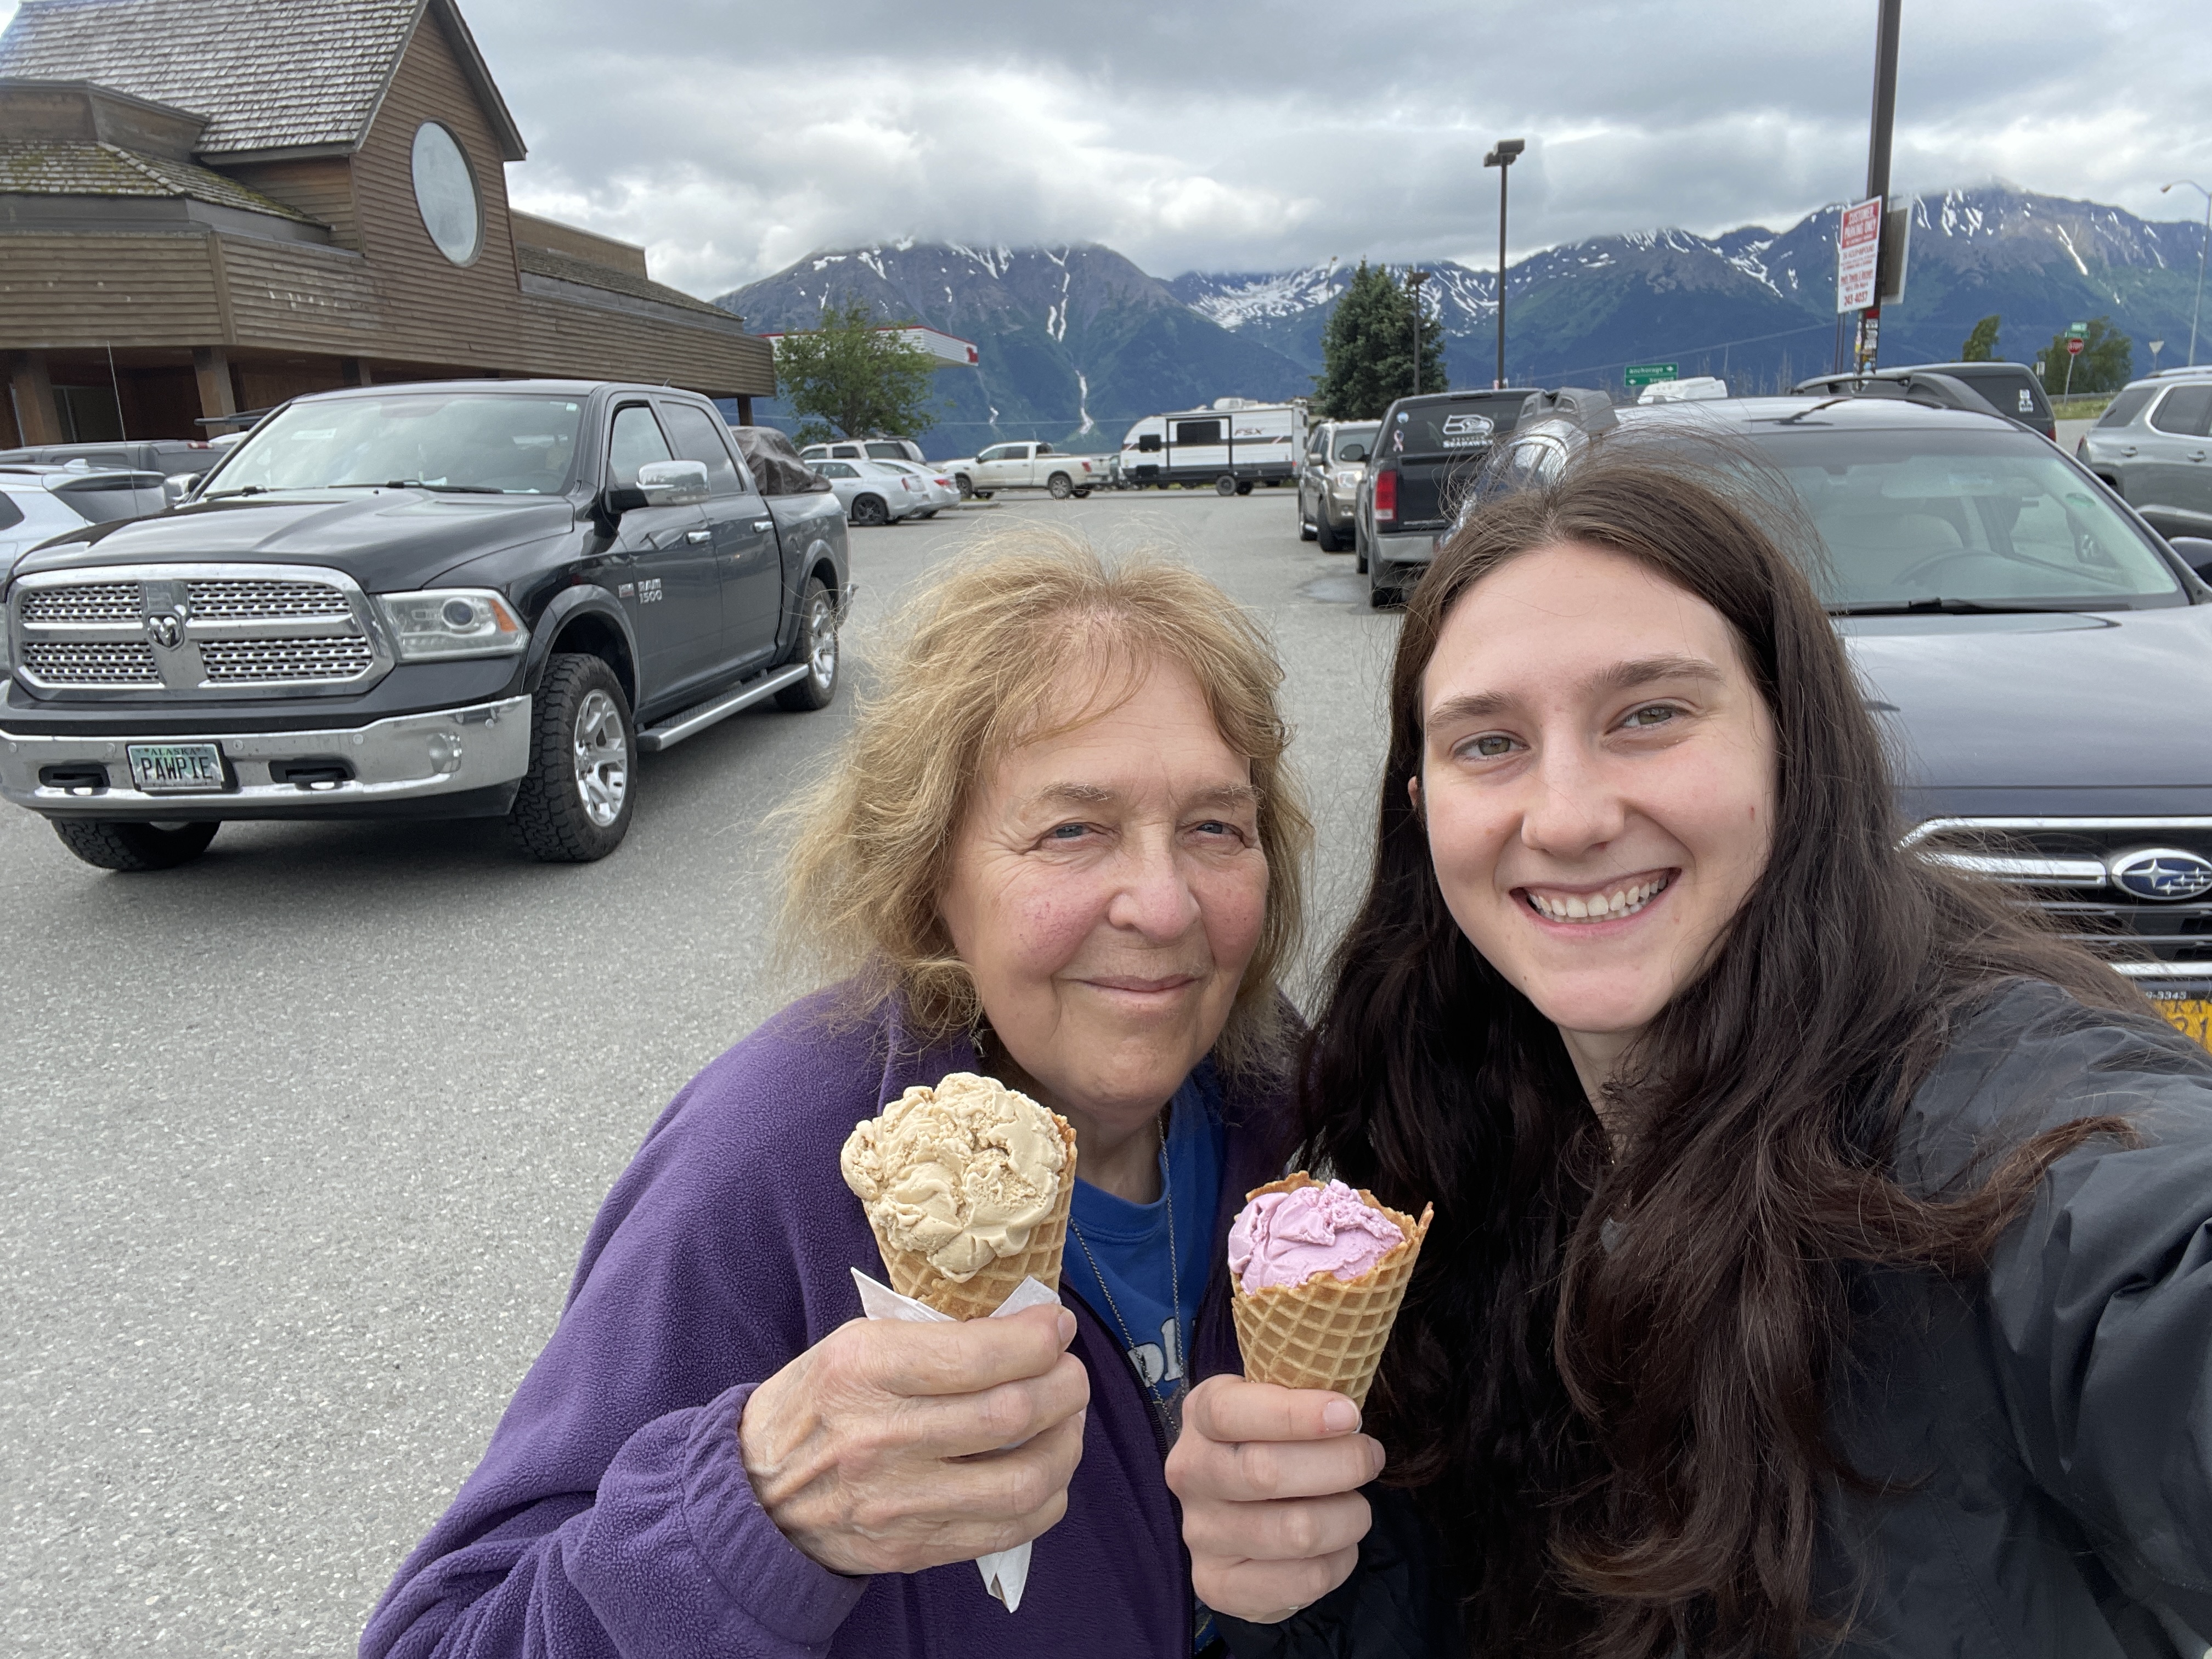 two cuteladies holding ice creams in a parking lot with mountains in the background